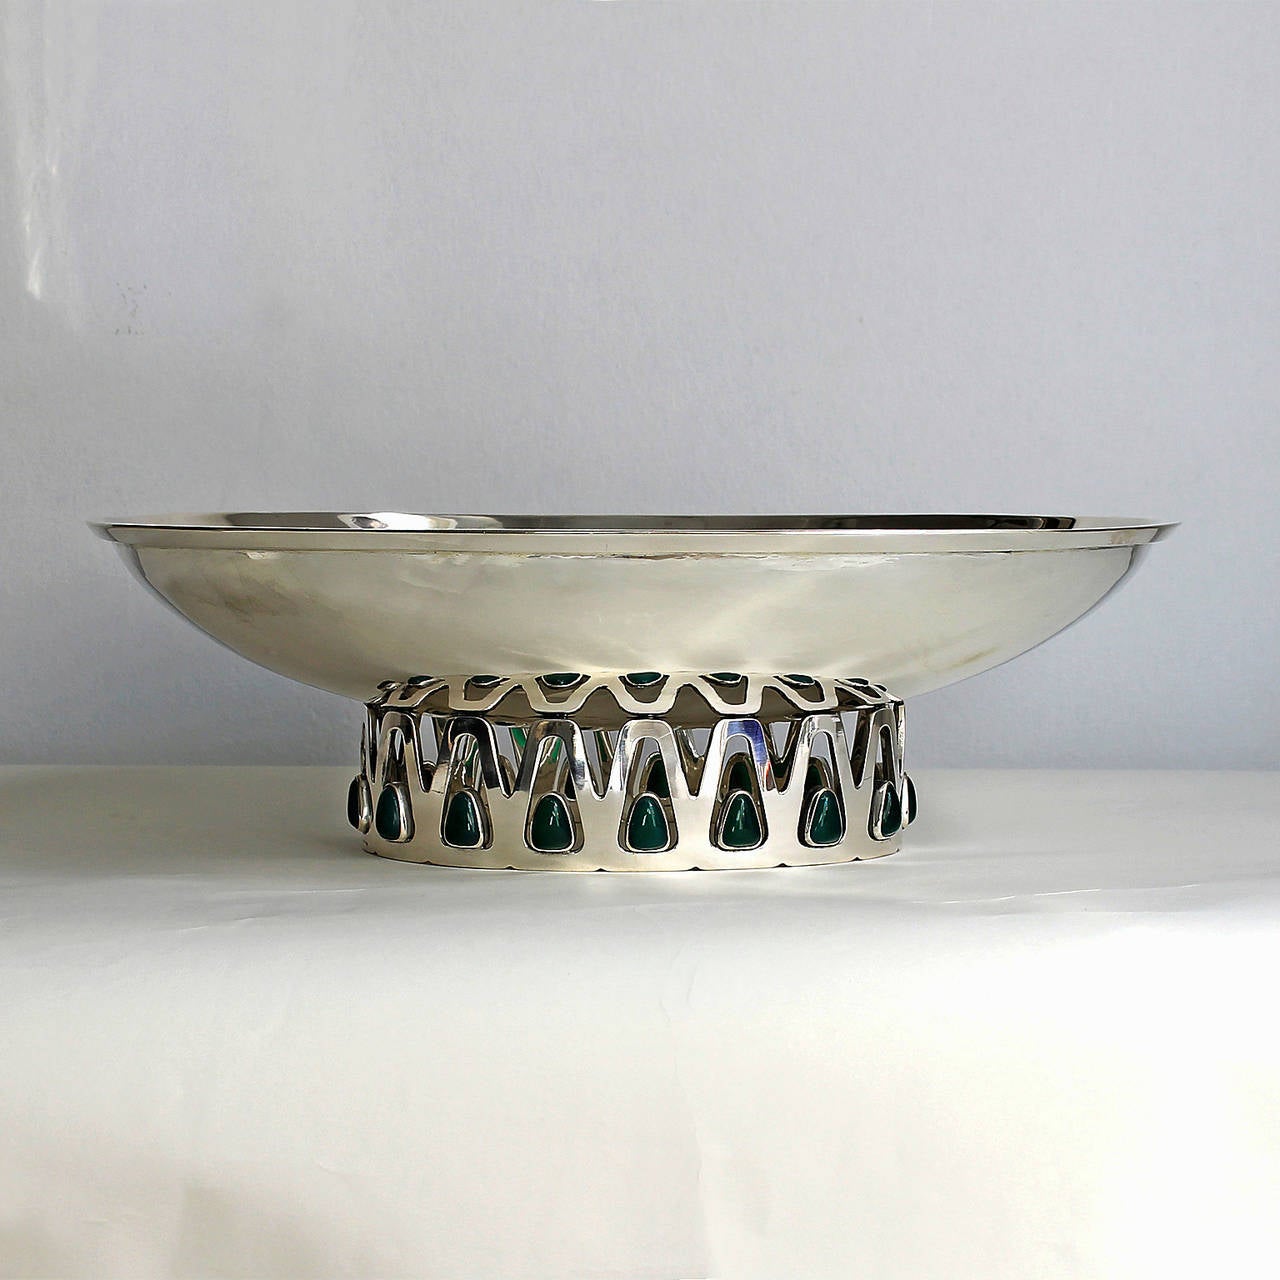 Sterling silver centerpiece by Serrahima, green resin decoration on base.
Stamps: Serrahima and 2 illegibles.
Weight: 1443 grms
Spain, Barcelona, circa 1950.